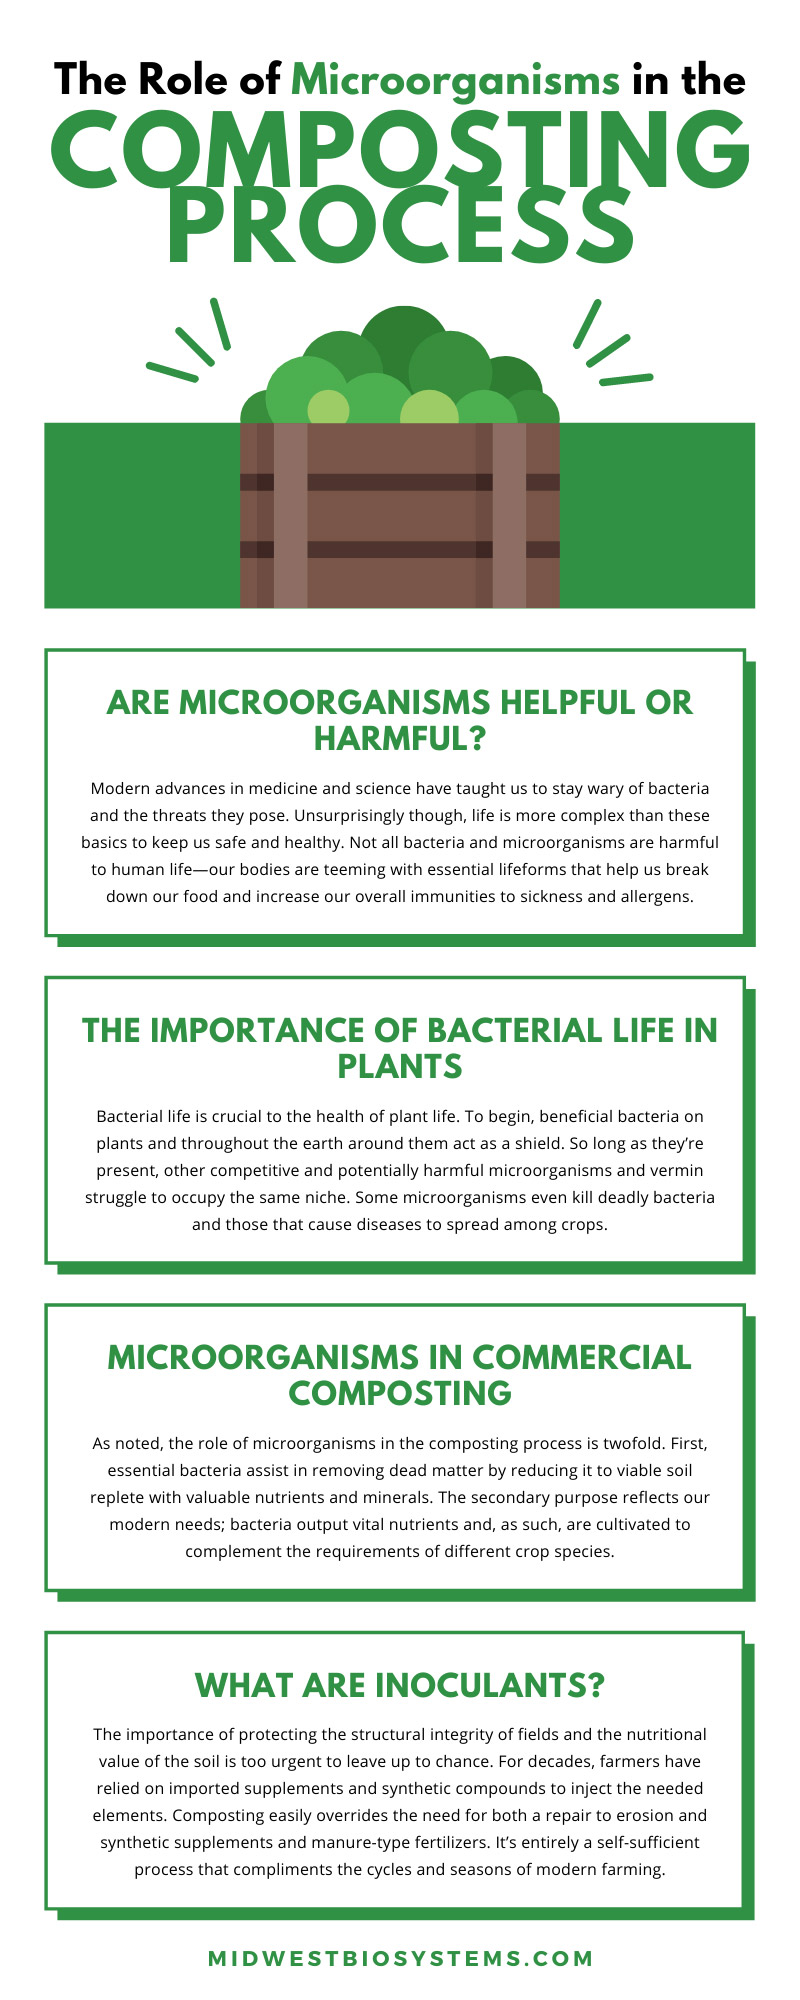 The Role of Microorganisms in the Composting Process